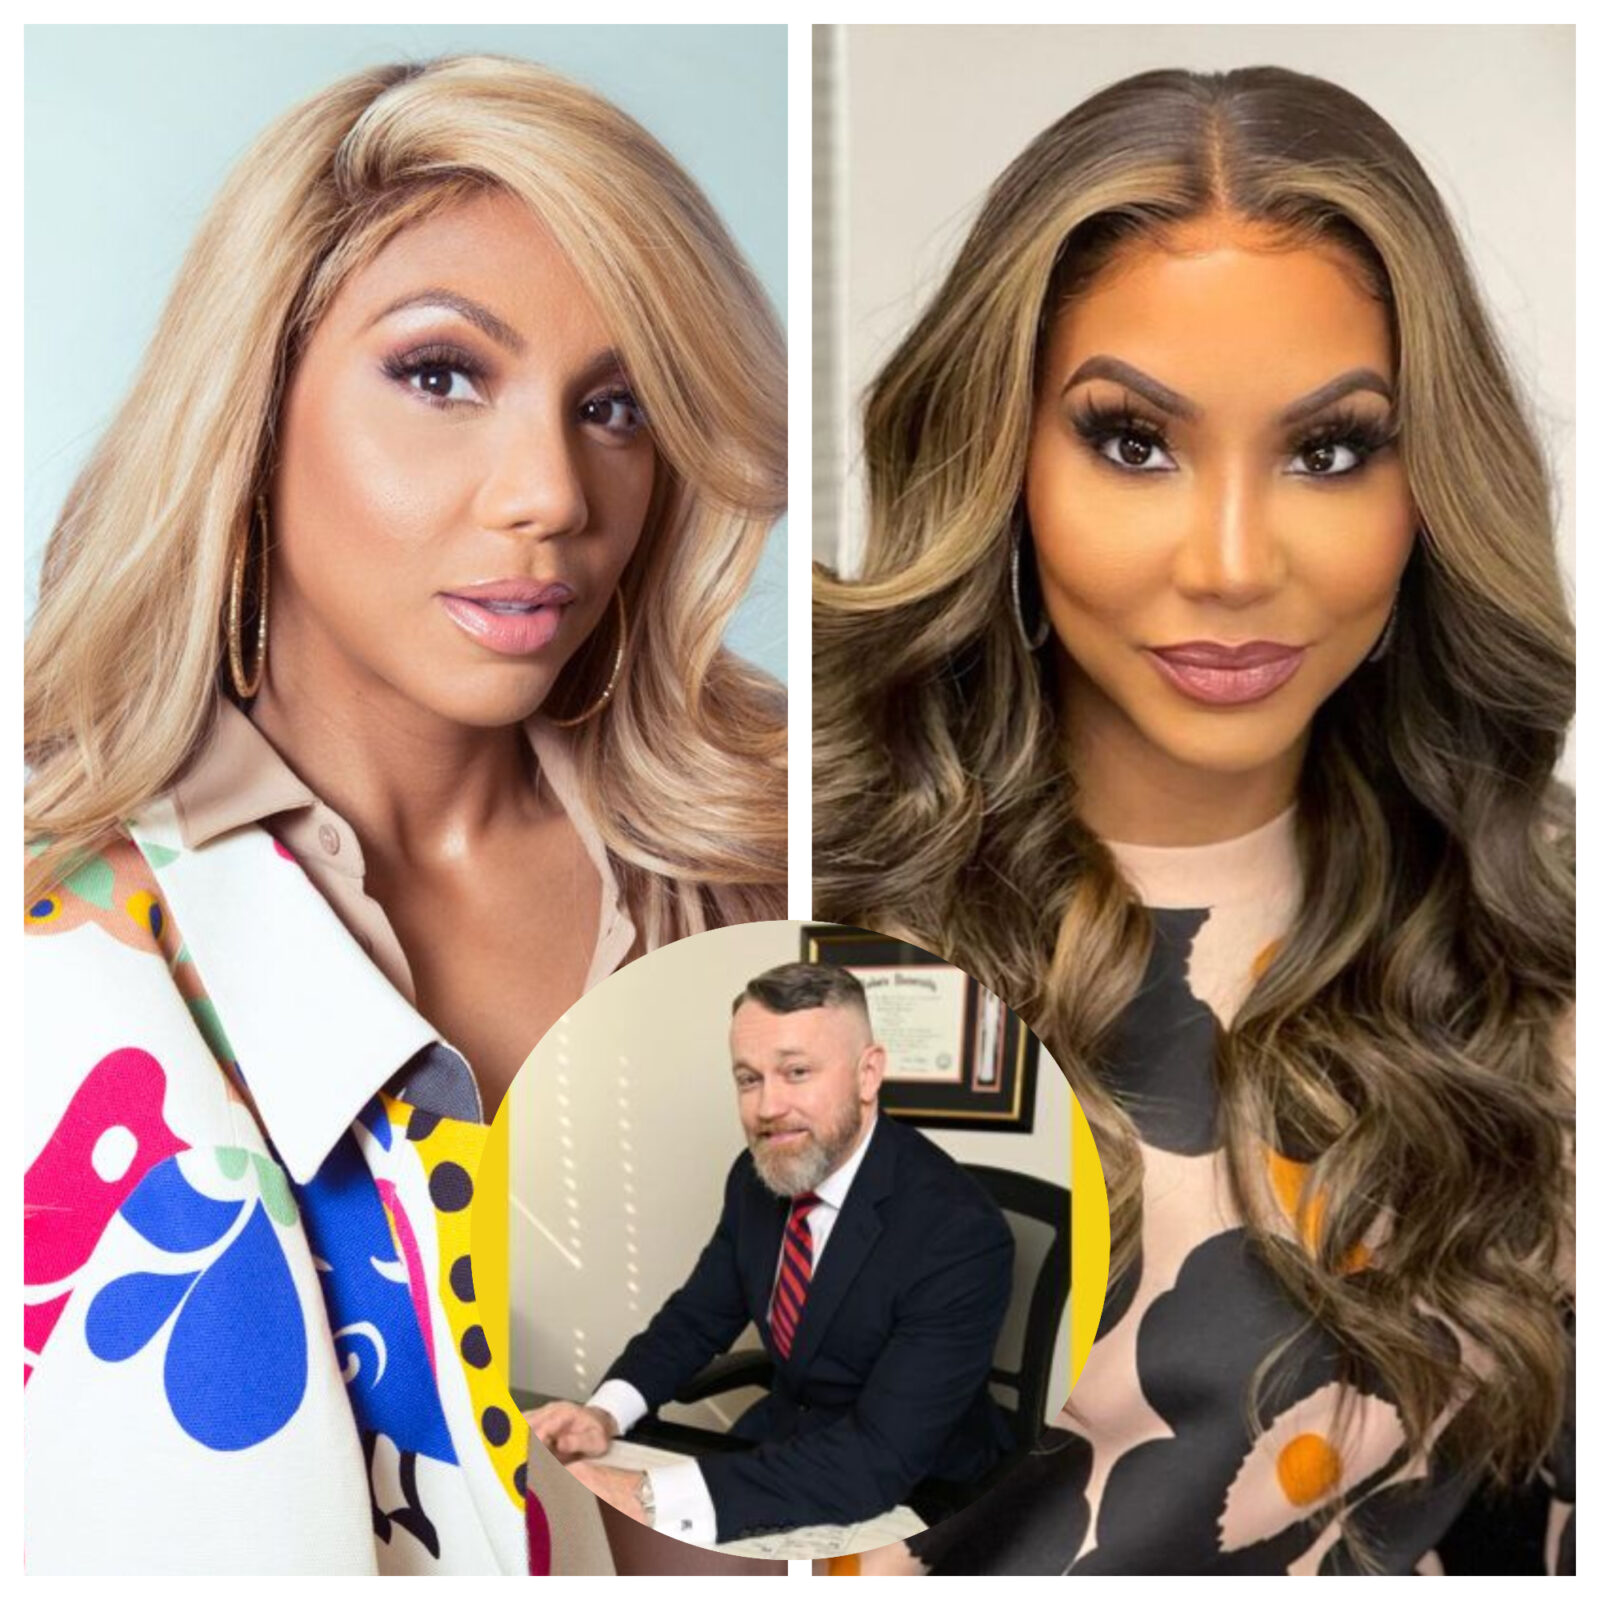 Tamar Braxton gave a little shout-out to her man Jeremy “J.R.” Robinson